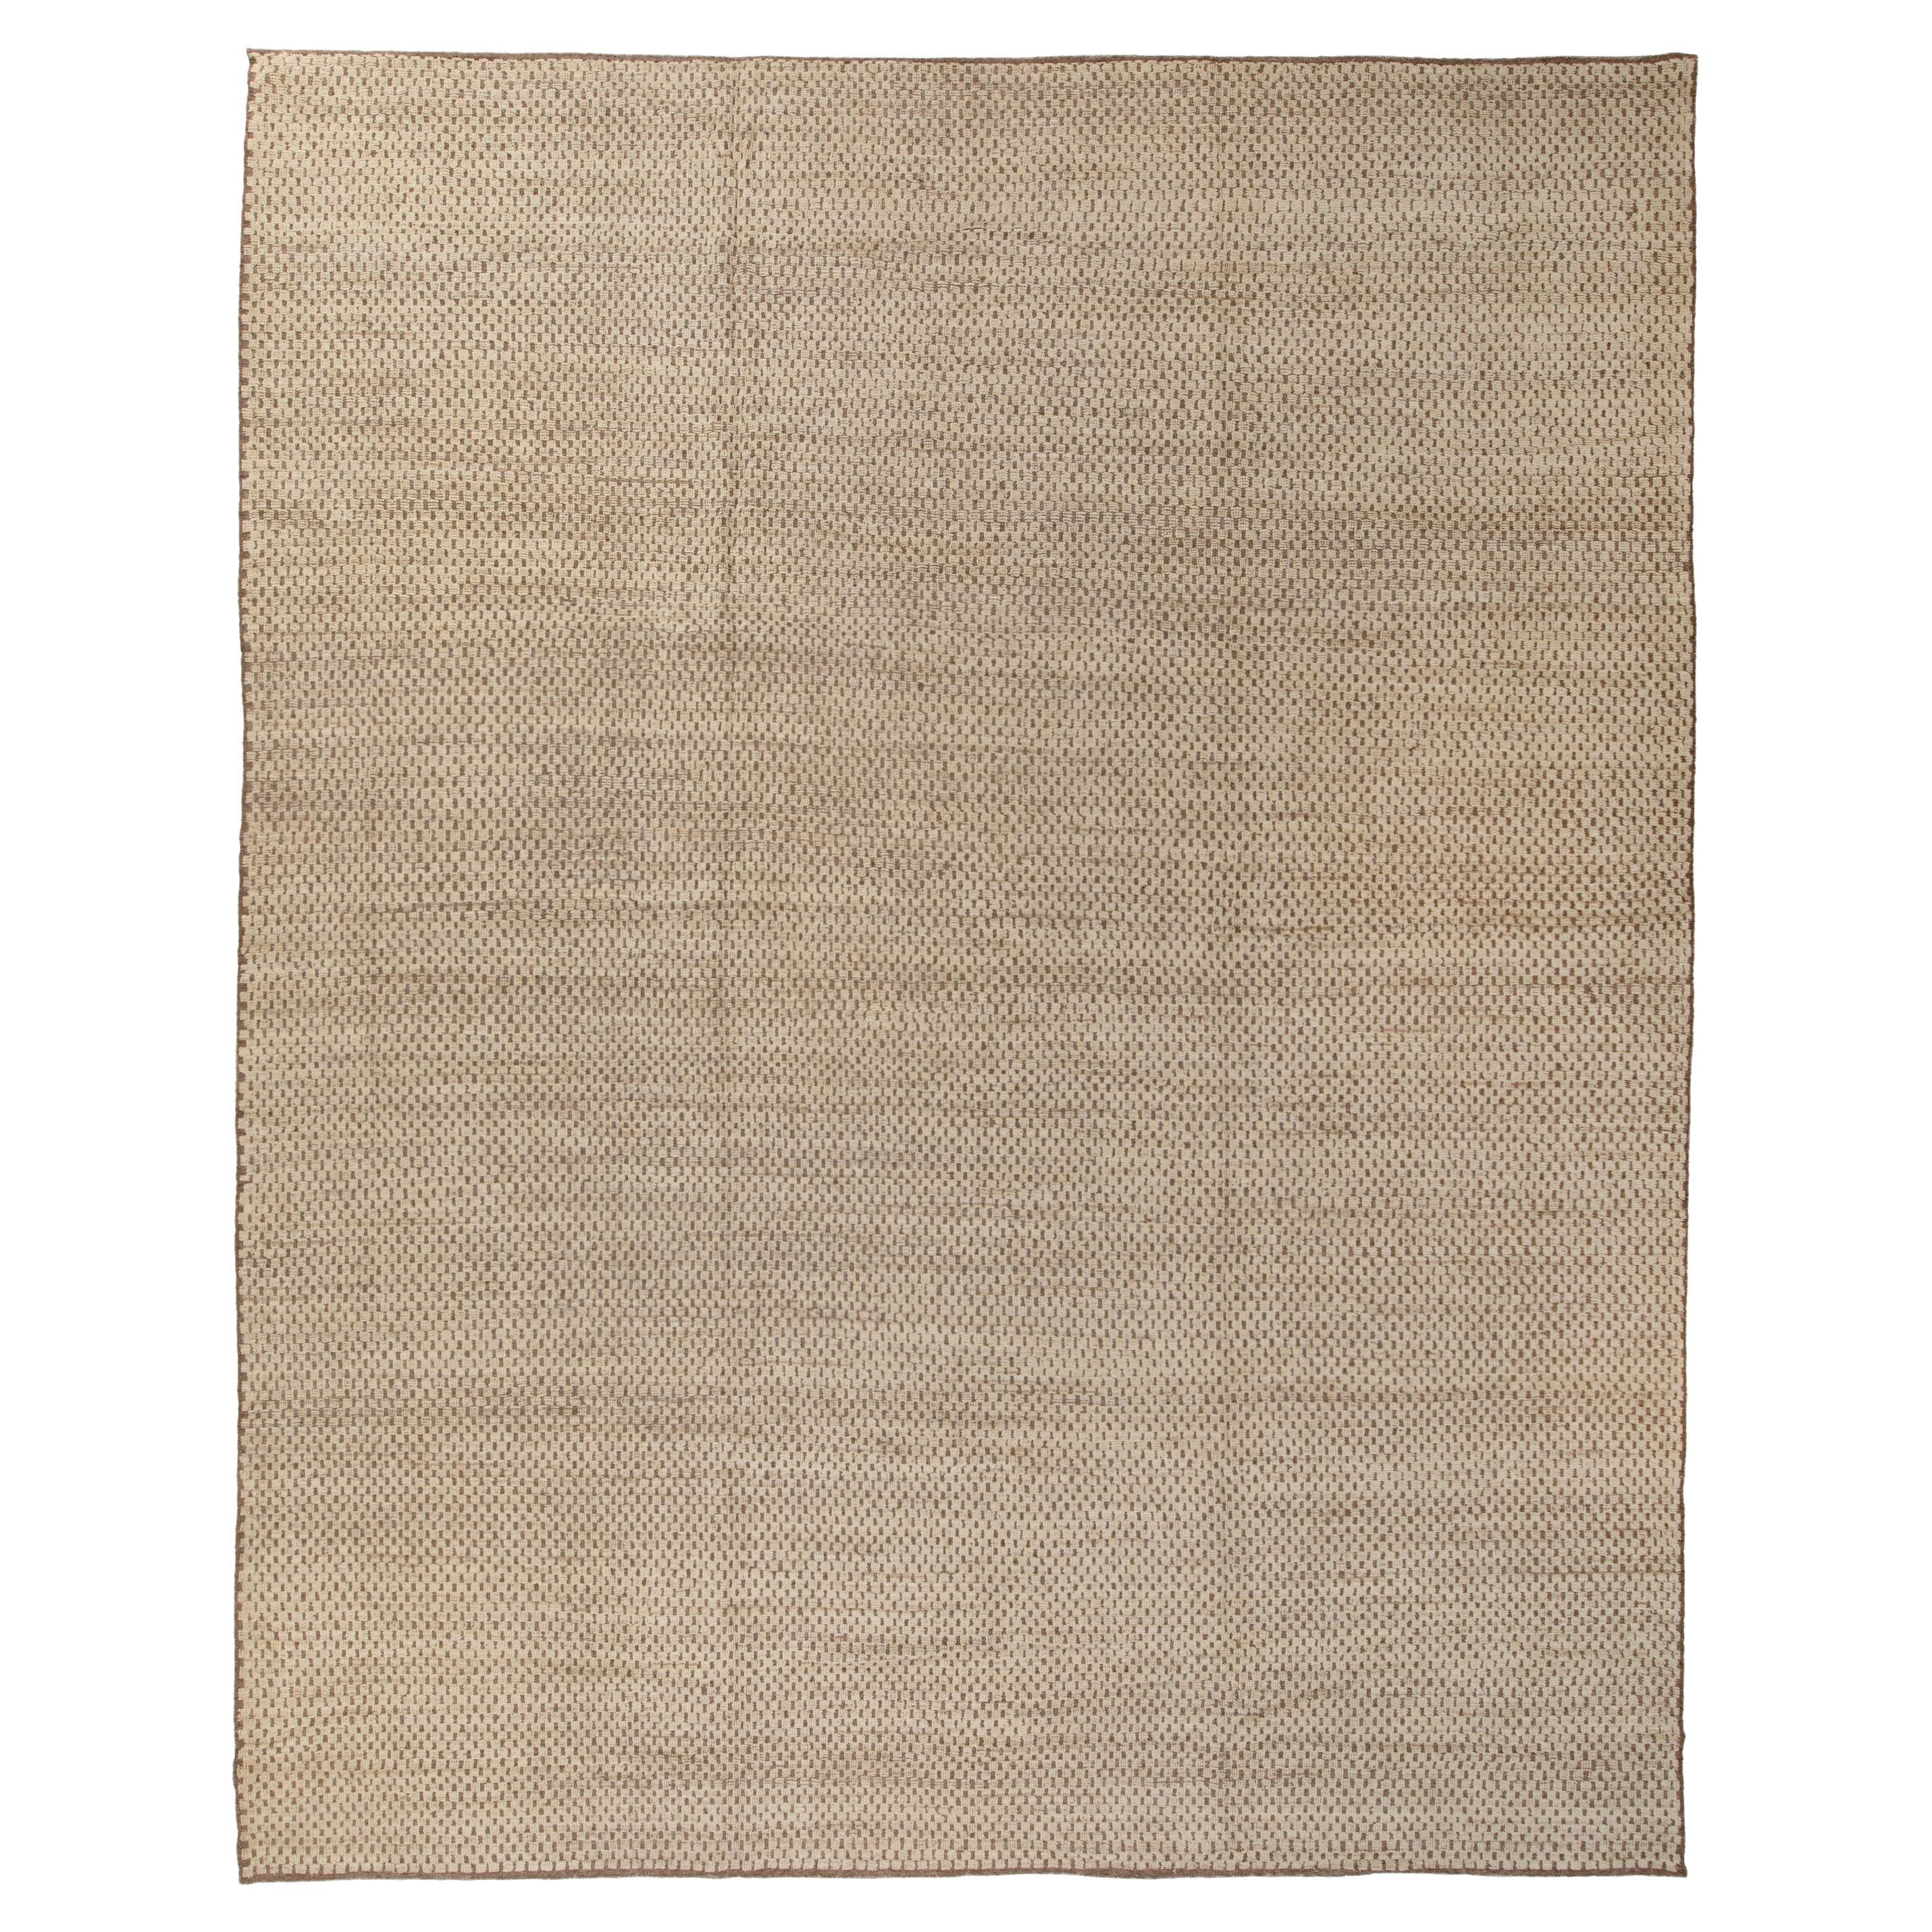 abc carpet Zameen Patterned Modern Wool Rug - 11'11" x 14'11" For Sale